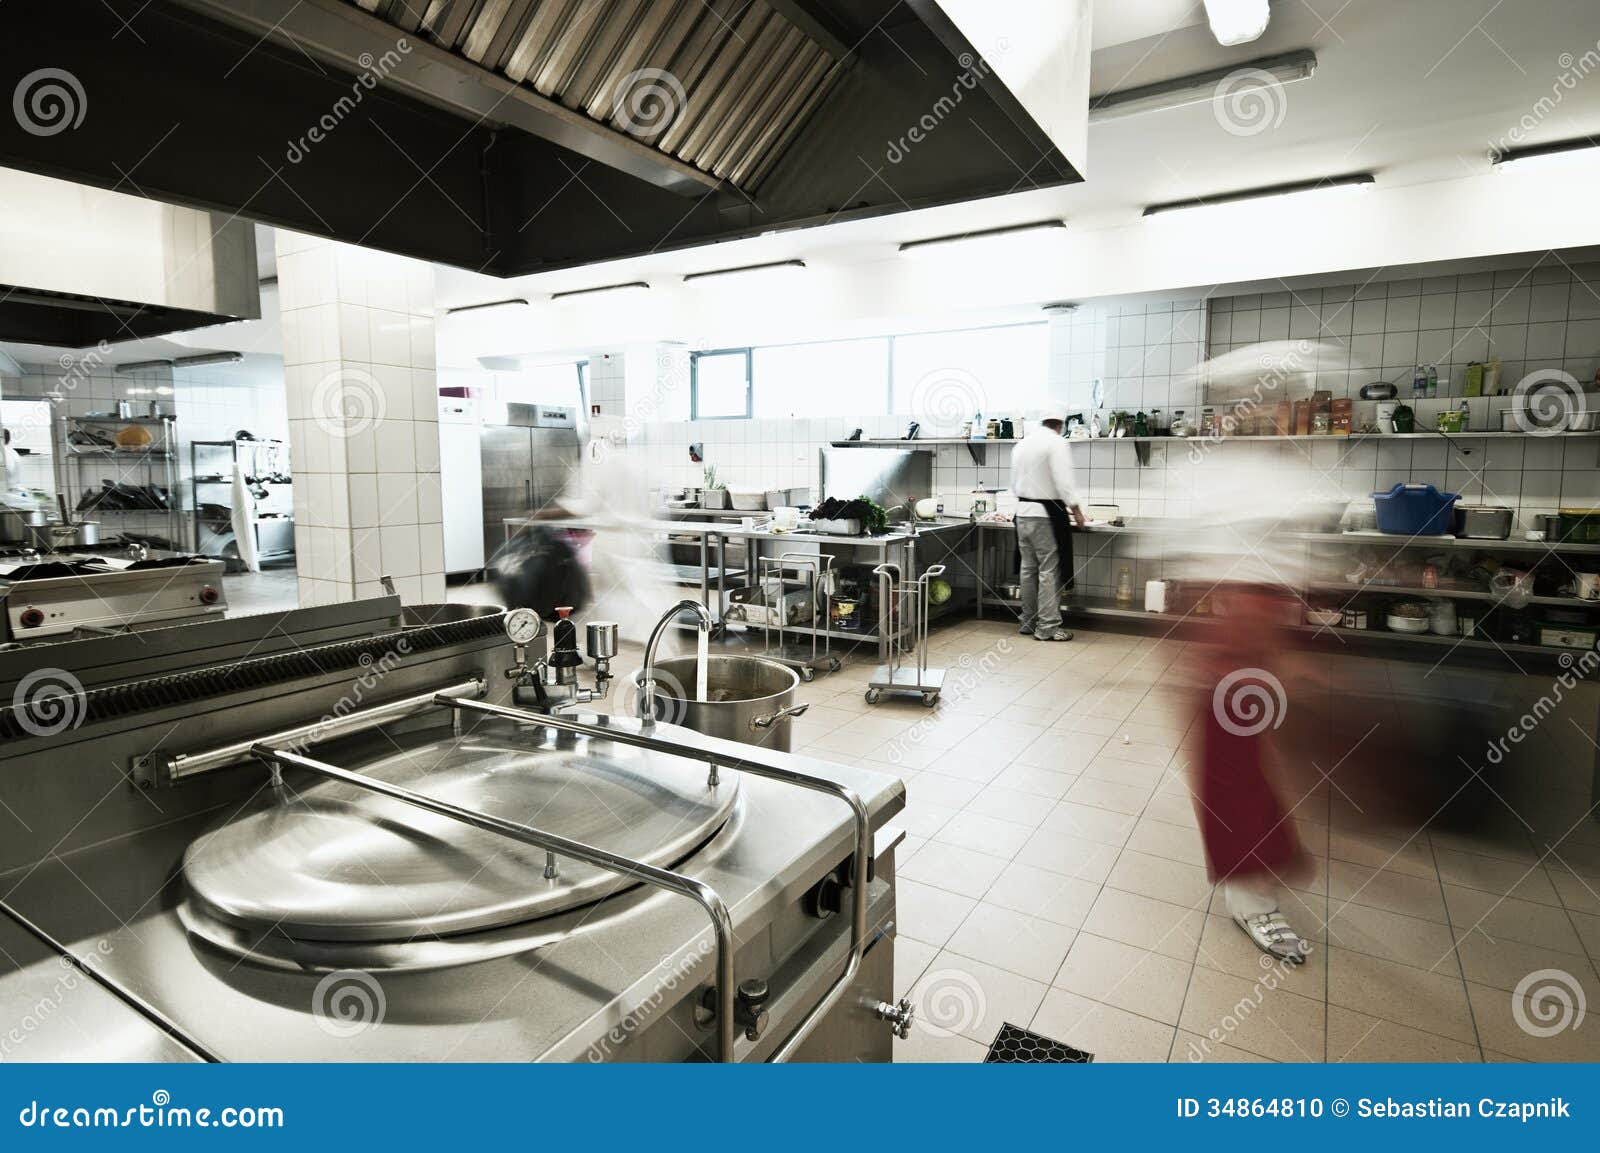 Industrial Restaurant Kitchens | Home Design and Decor Reviews